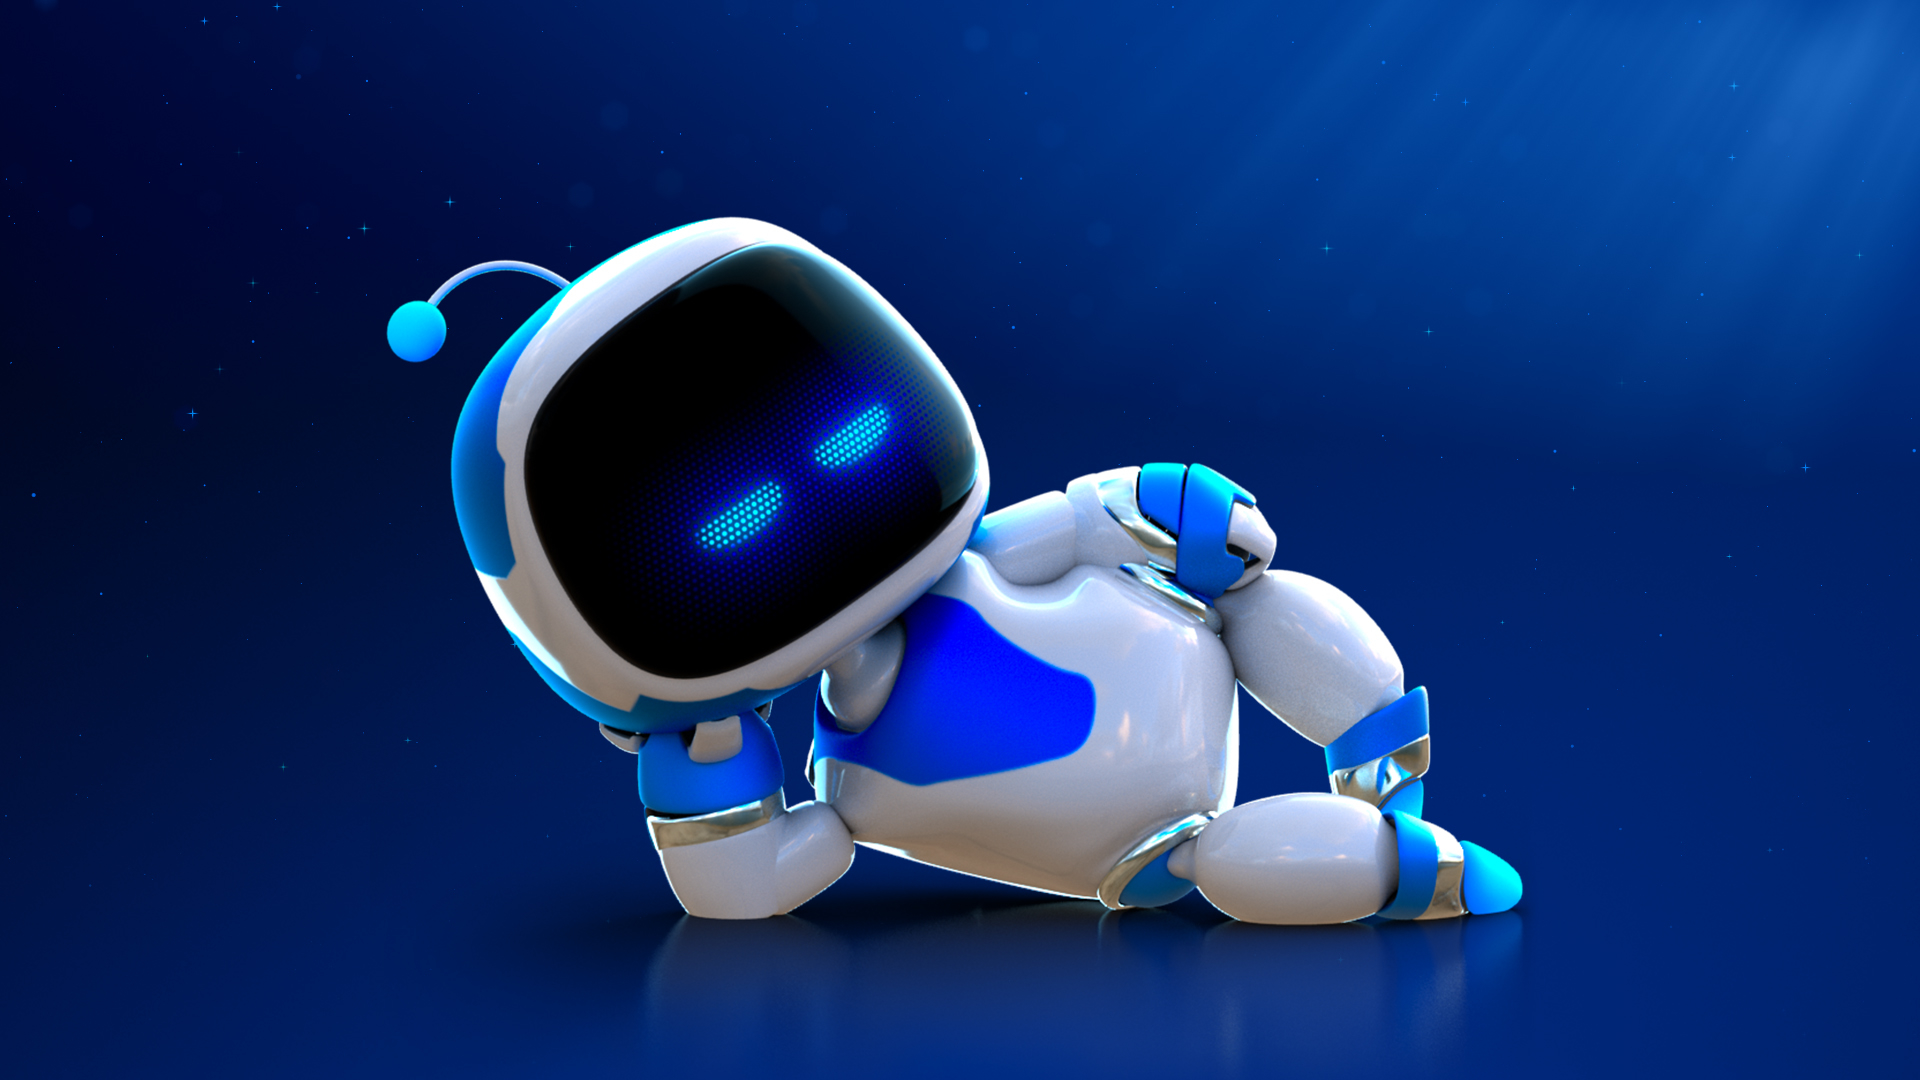 Astro Bot Rescue Mission 2021 Wallpaper, HD Games 4K Wallpapers, Images